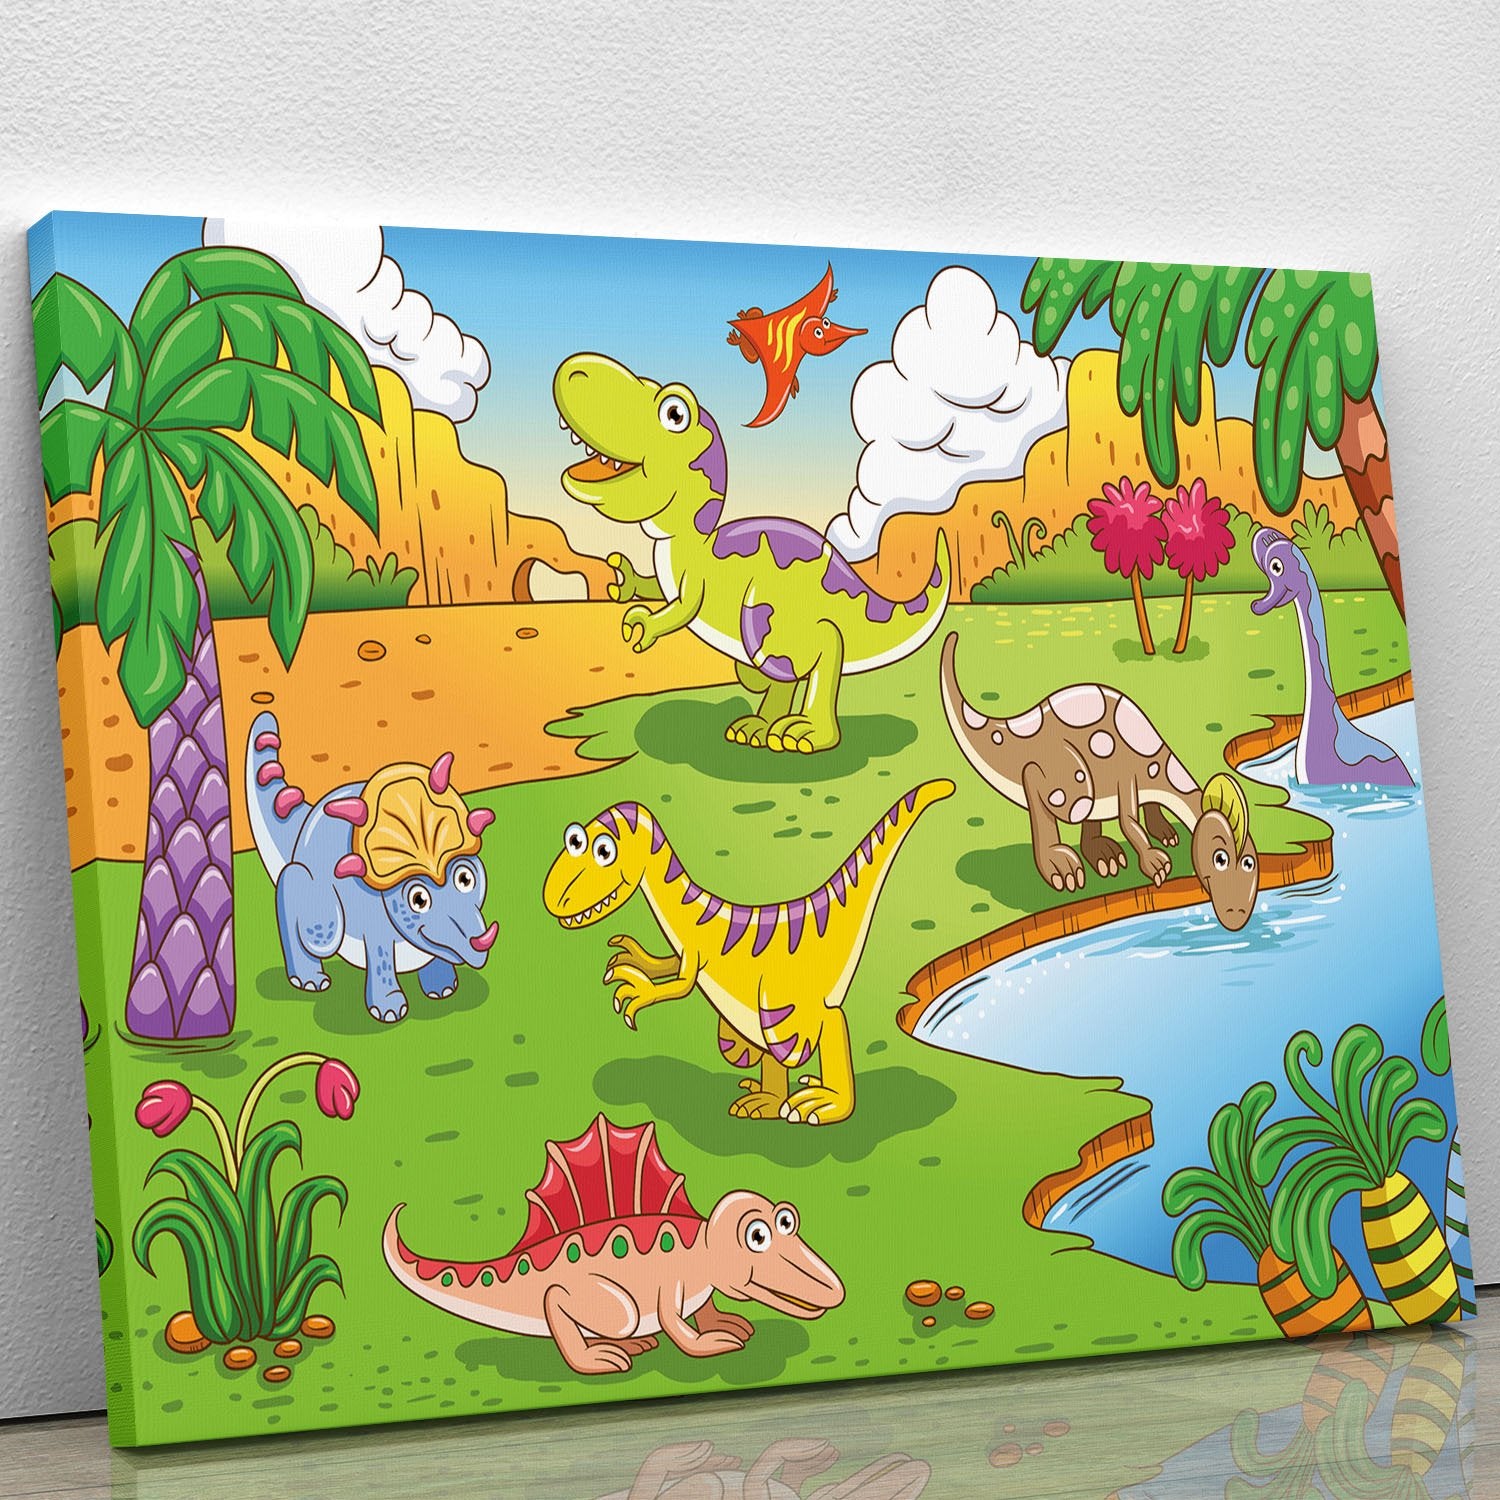 Cute dinosaurs in prehistoric scene Canvas Print or Poster